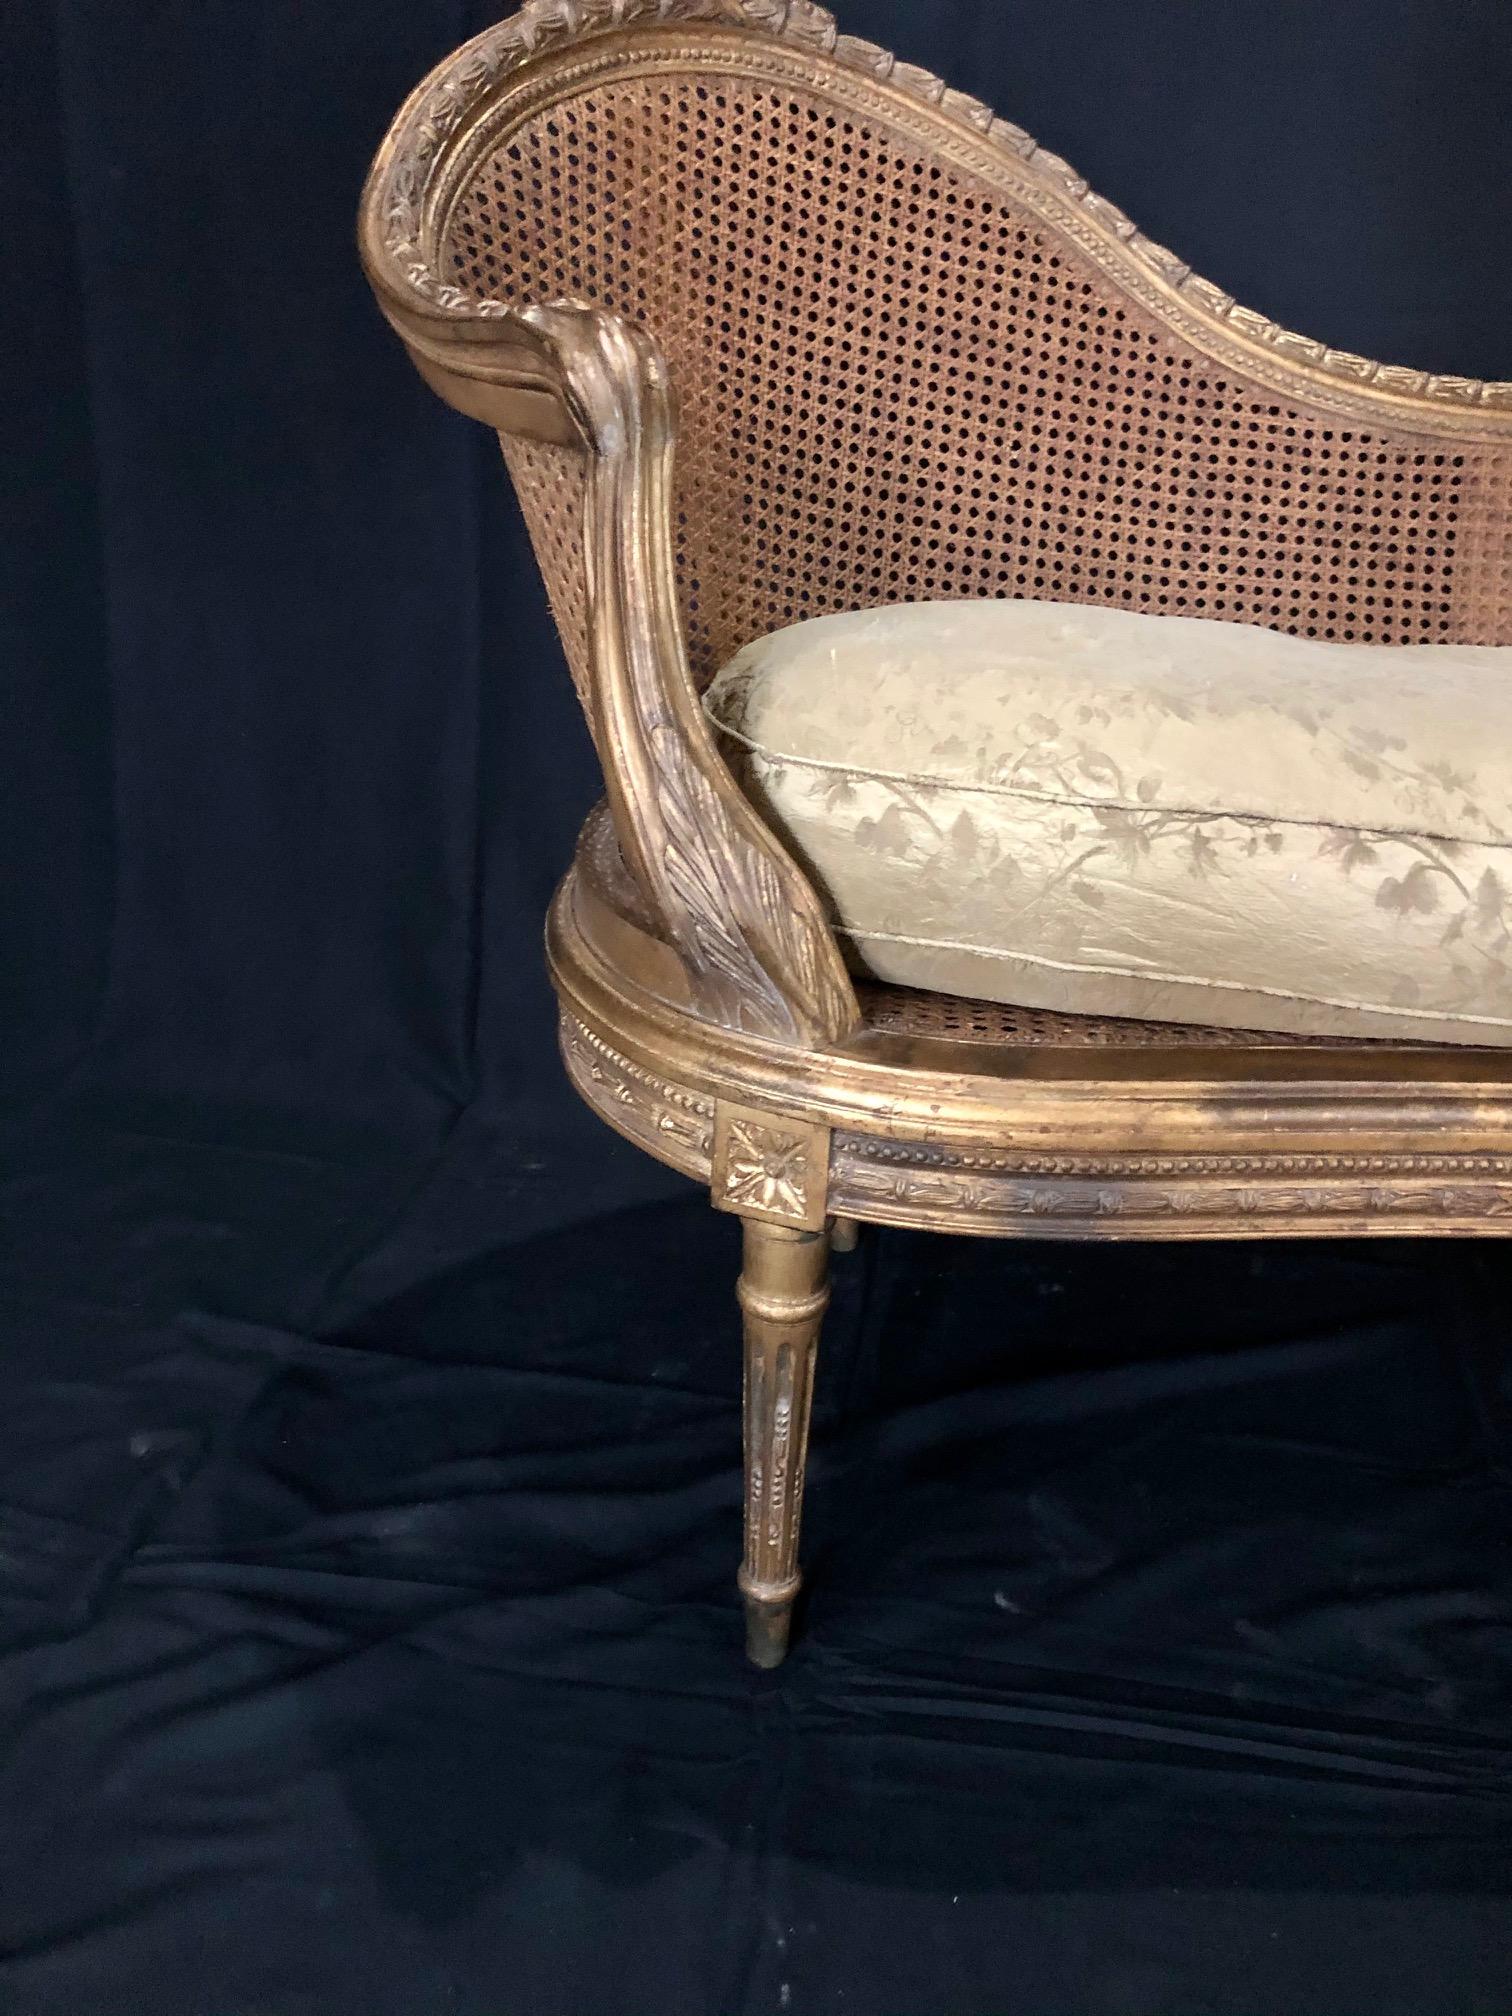 Beautiful curved back French Louis XV style gold gilt caned loveseat settee with immaculate caning and original separate down cushion. #5074
 
Measure: H seat 15-23” (without/with cushion).